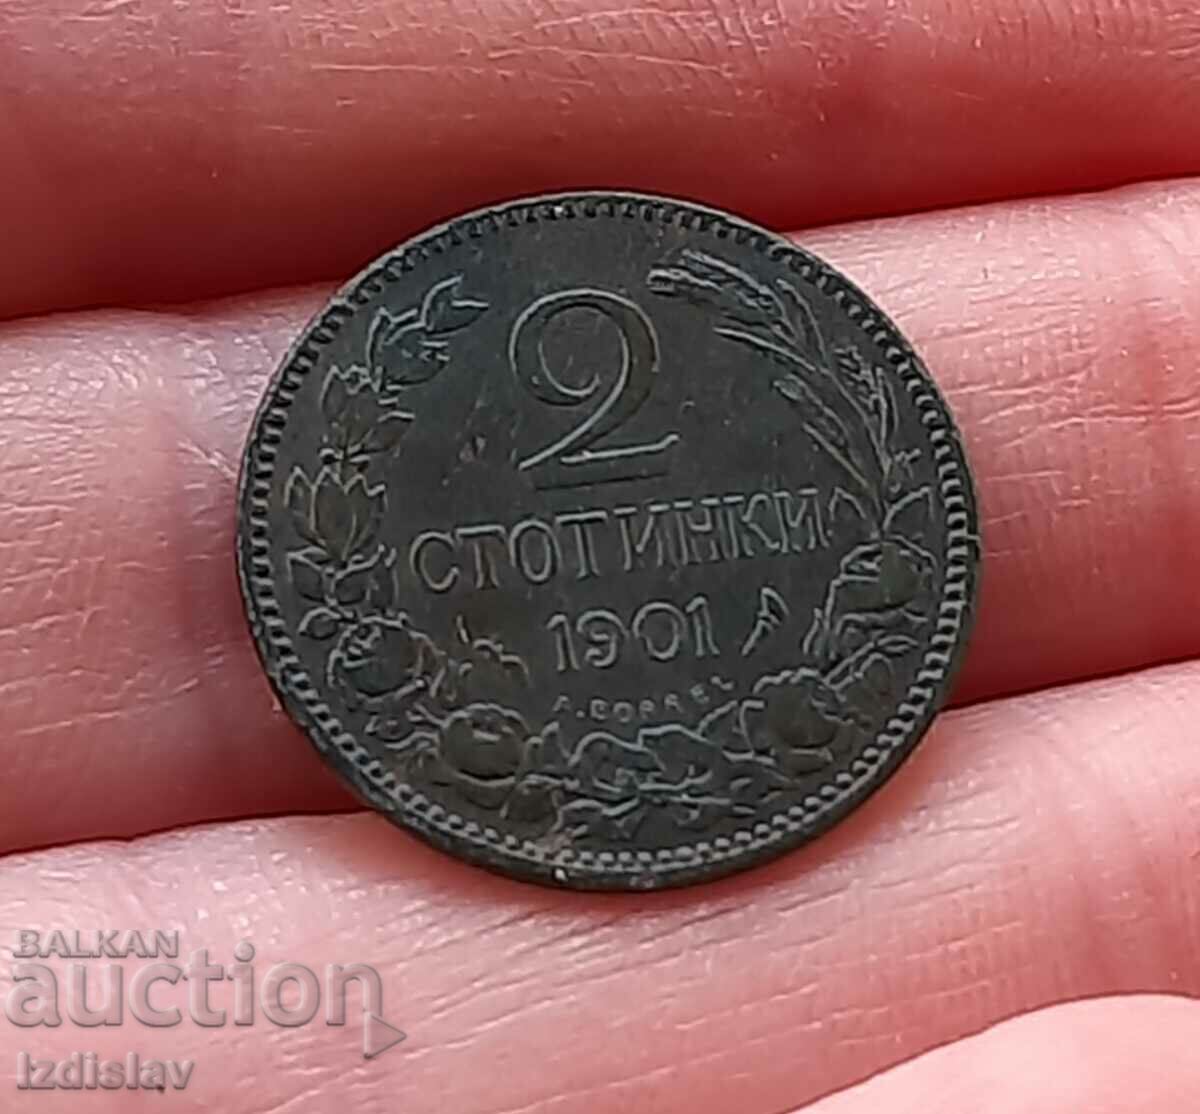 2 cents from 1901